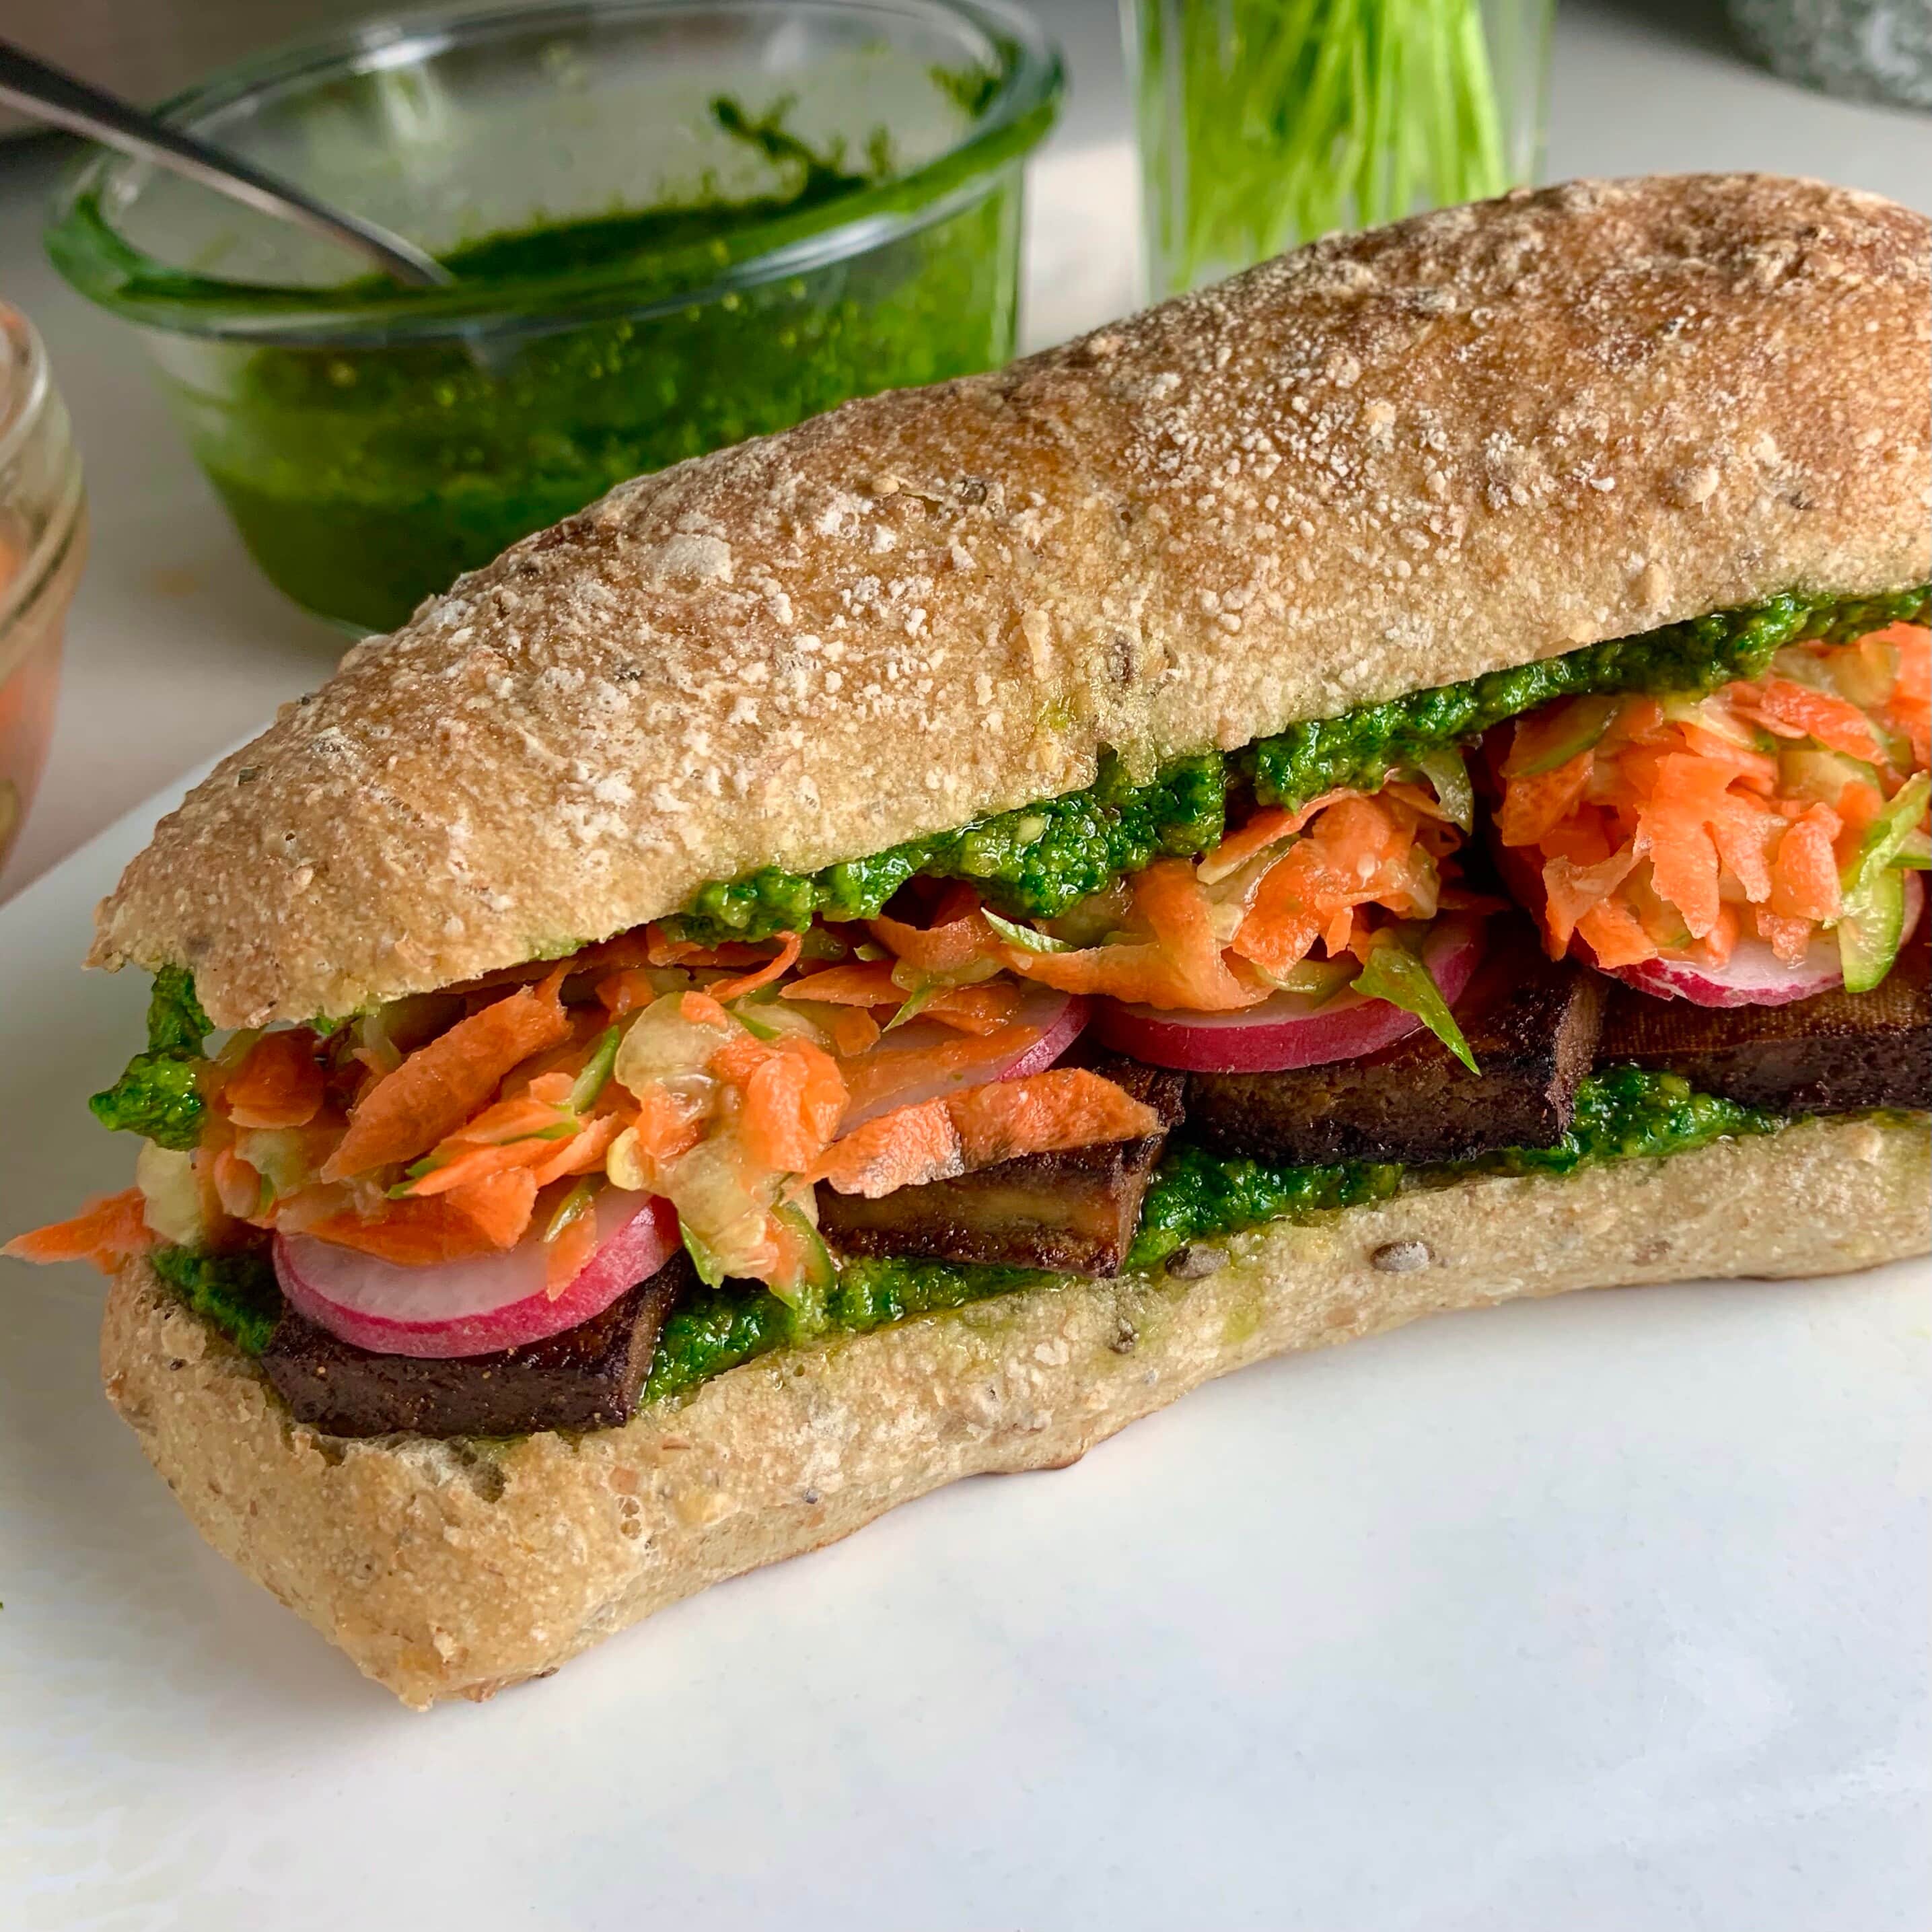 Try this Vietnamese Banh Mi Sandwich recipe at home